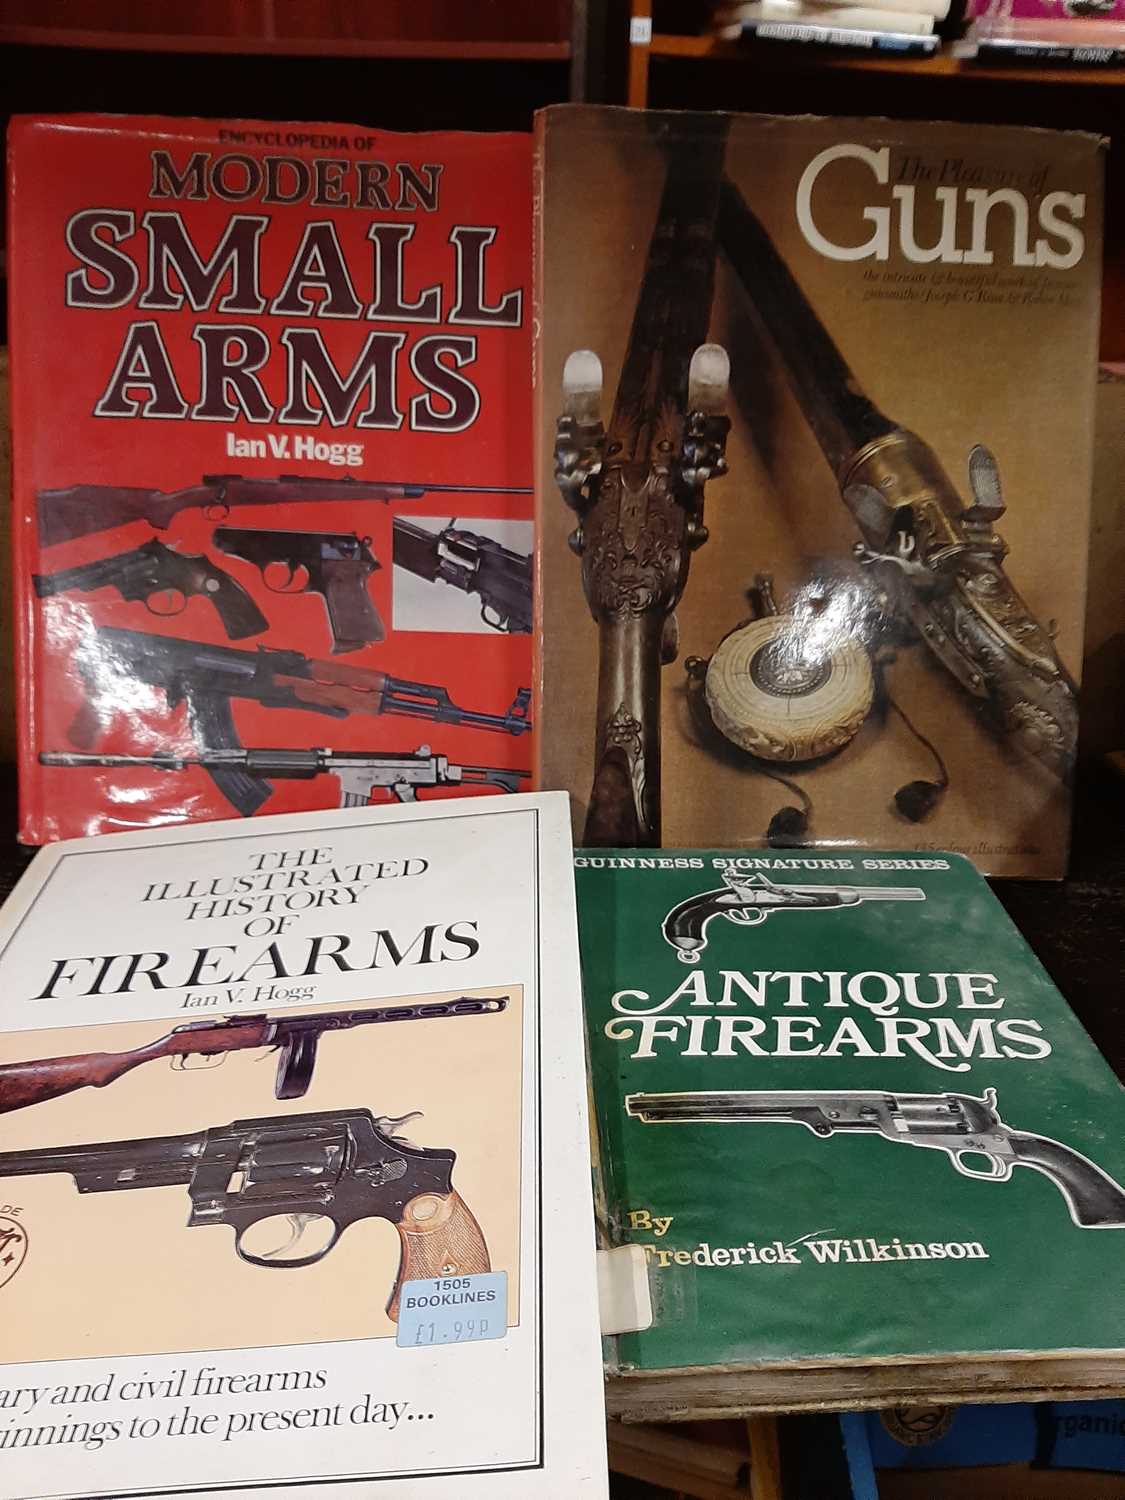 10 large format books and 8 magazines related to guns and shooting [our ref: 283]